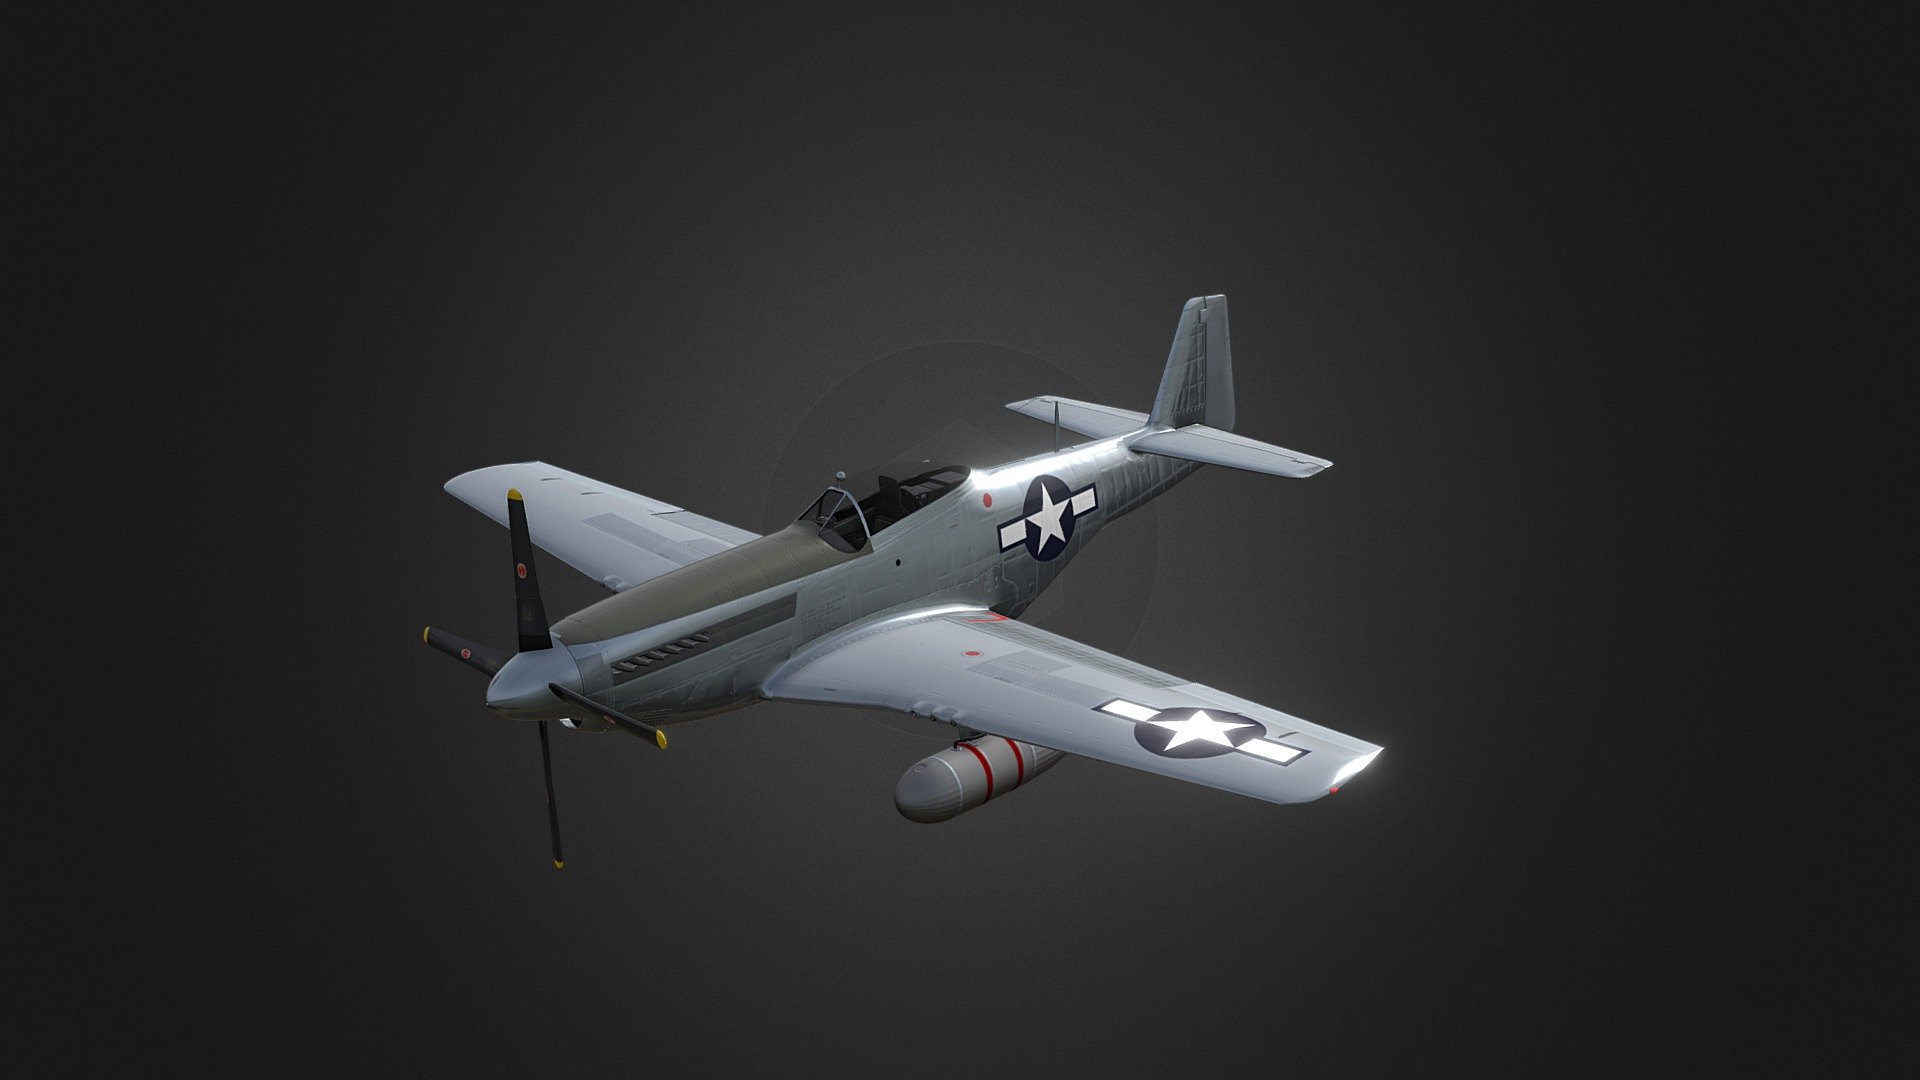 Original P-51 Mustang model with highly detailed panel lines and rivets. Clean 8k textures ready for you to apply your own custom weathering and markings.

Layered PSDs available upon request 3d model